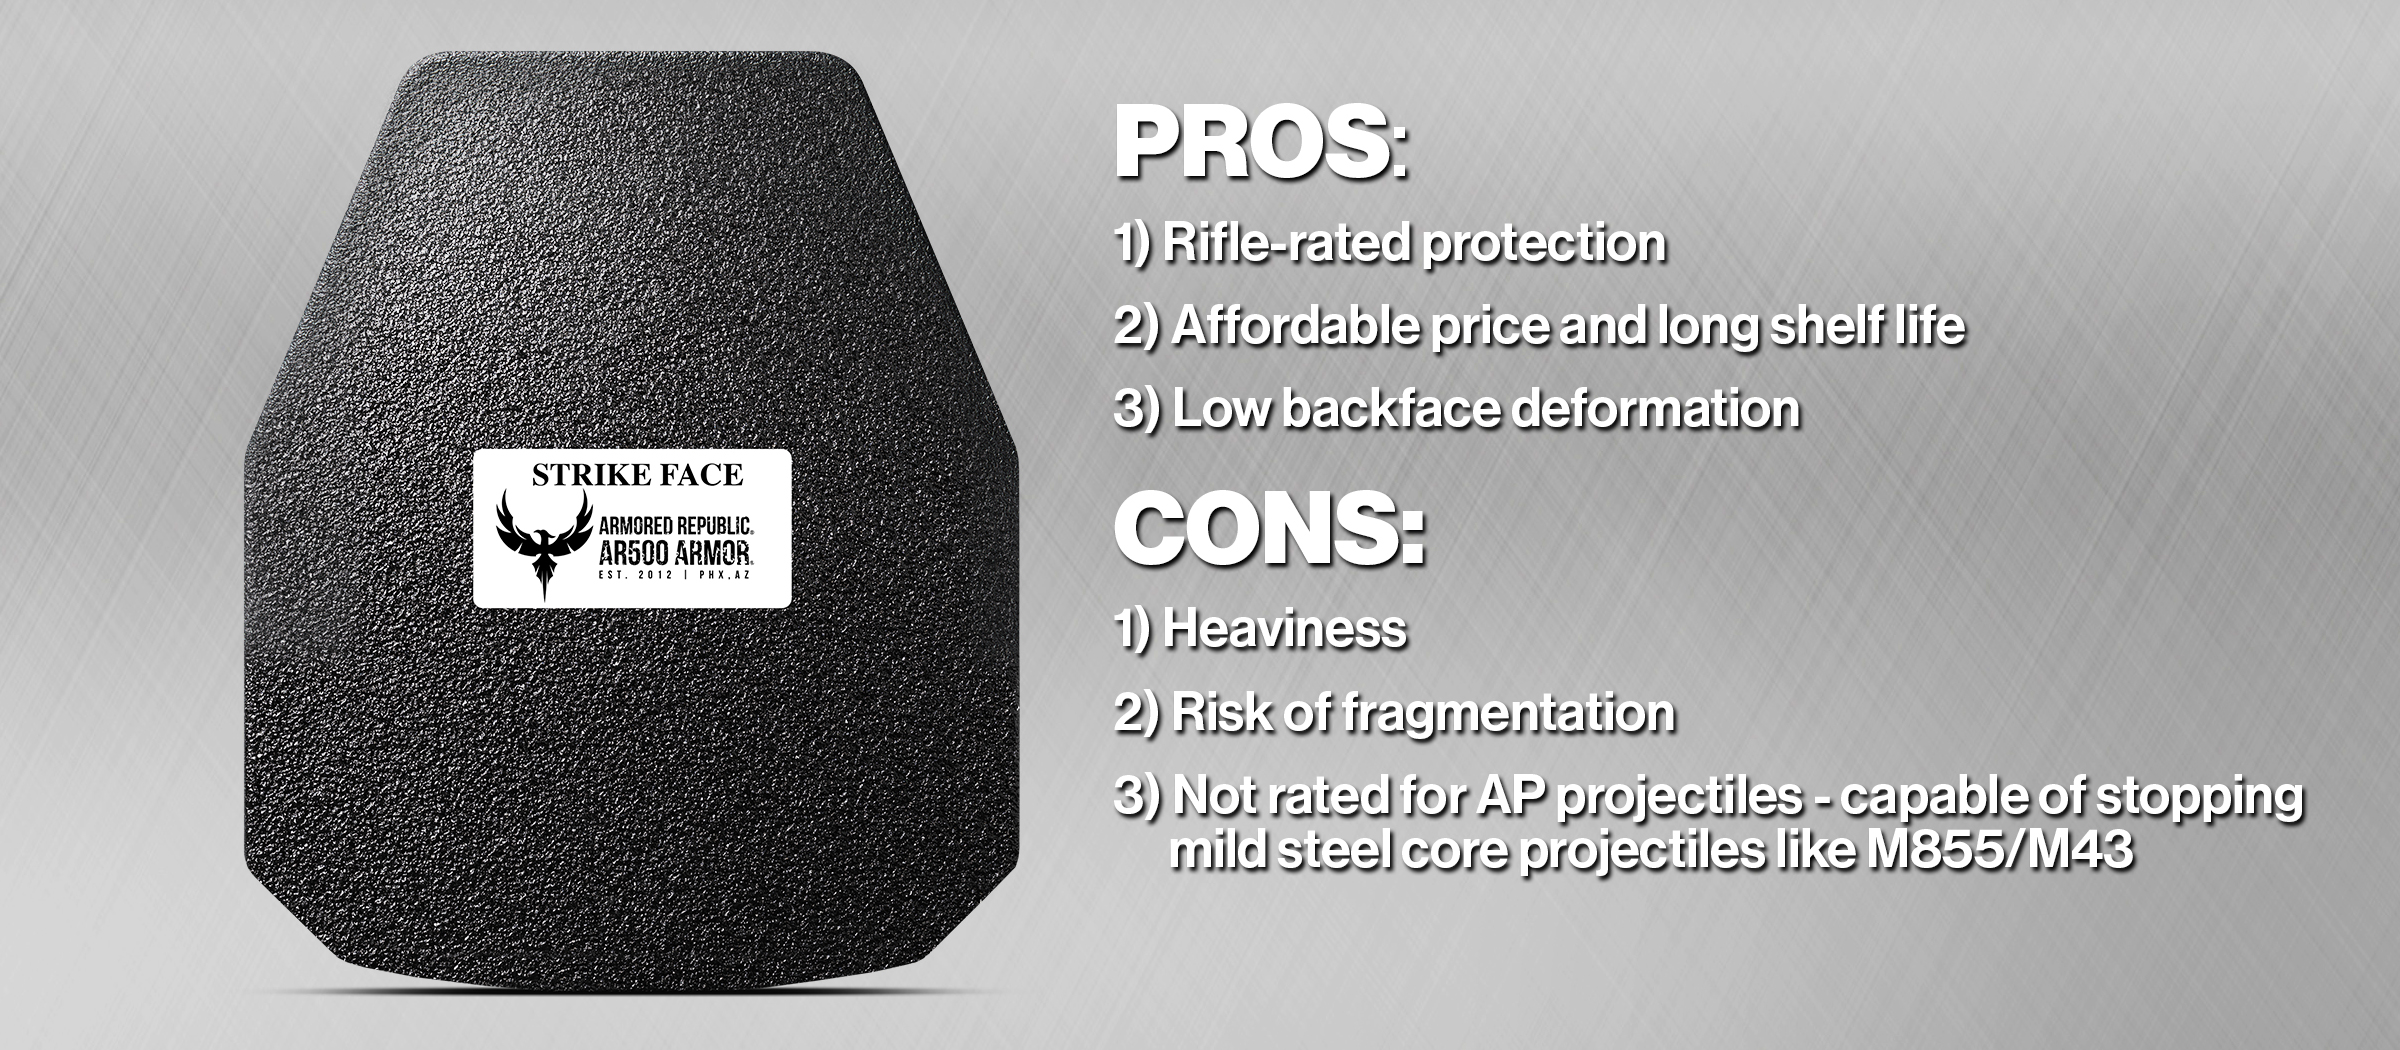 Pros and Cons of Steel Alloy Body Armor from Armored Republic